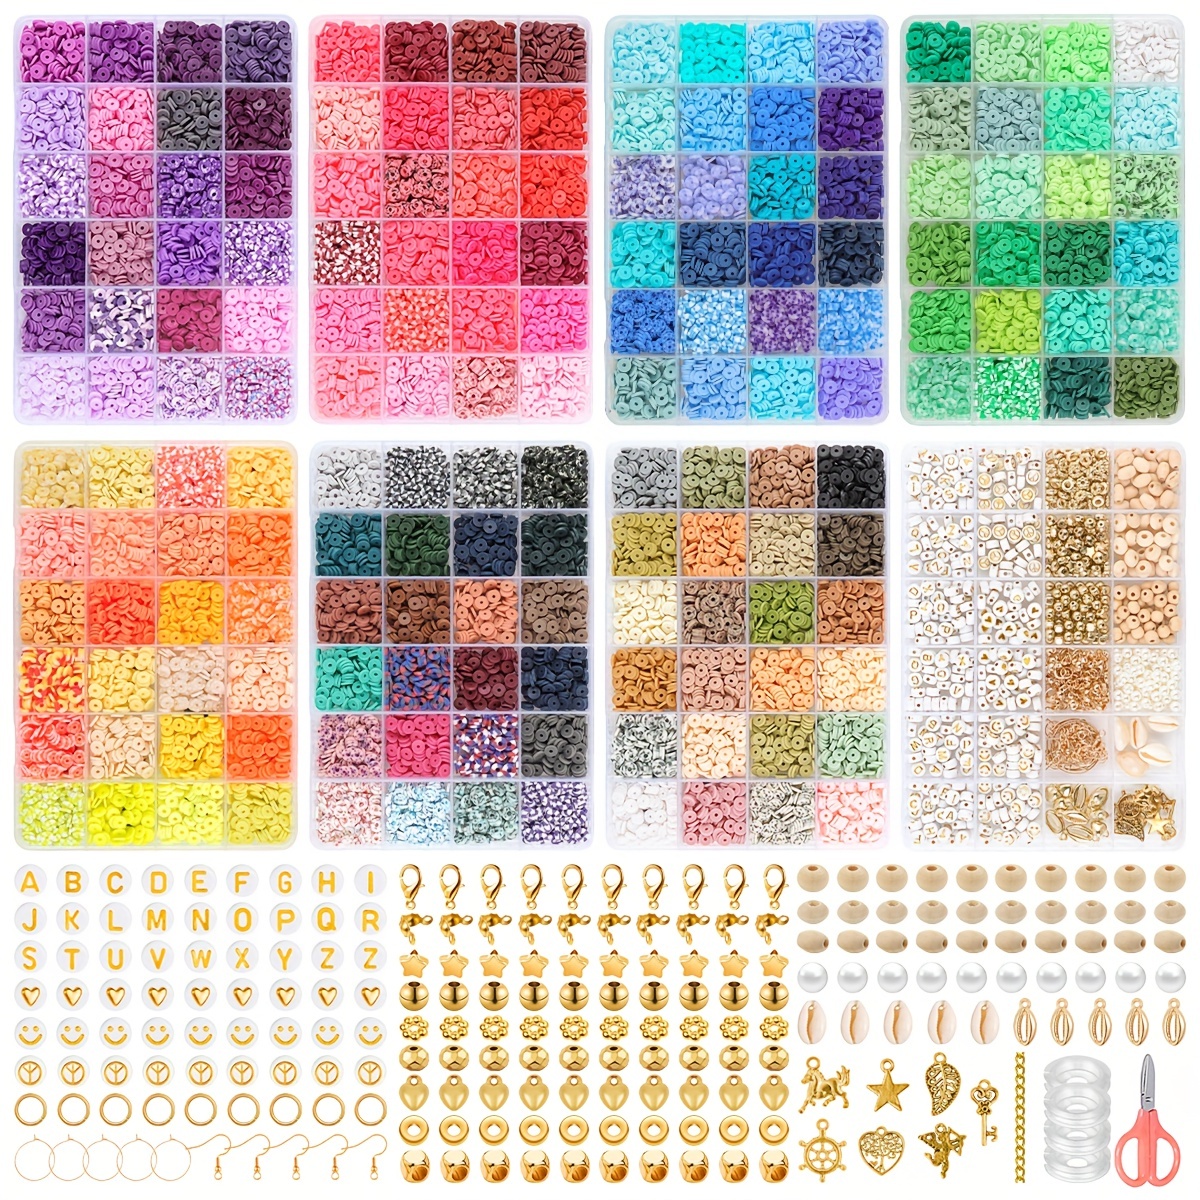 1200PCS Glass Beads for Jewelry Making, 40 Colors 8mm Crystal Beads  Bracelet Making Kit Glass Beads Bulk for Bracelets Making Kit Jewelry  Making